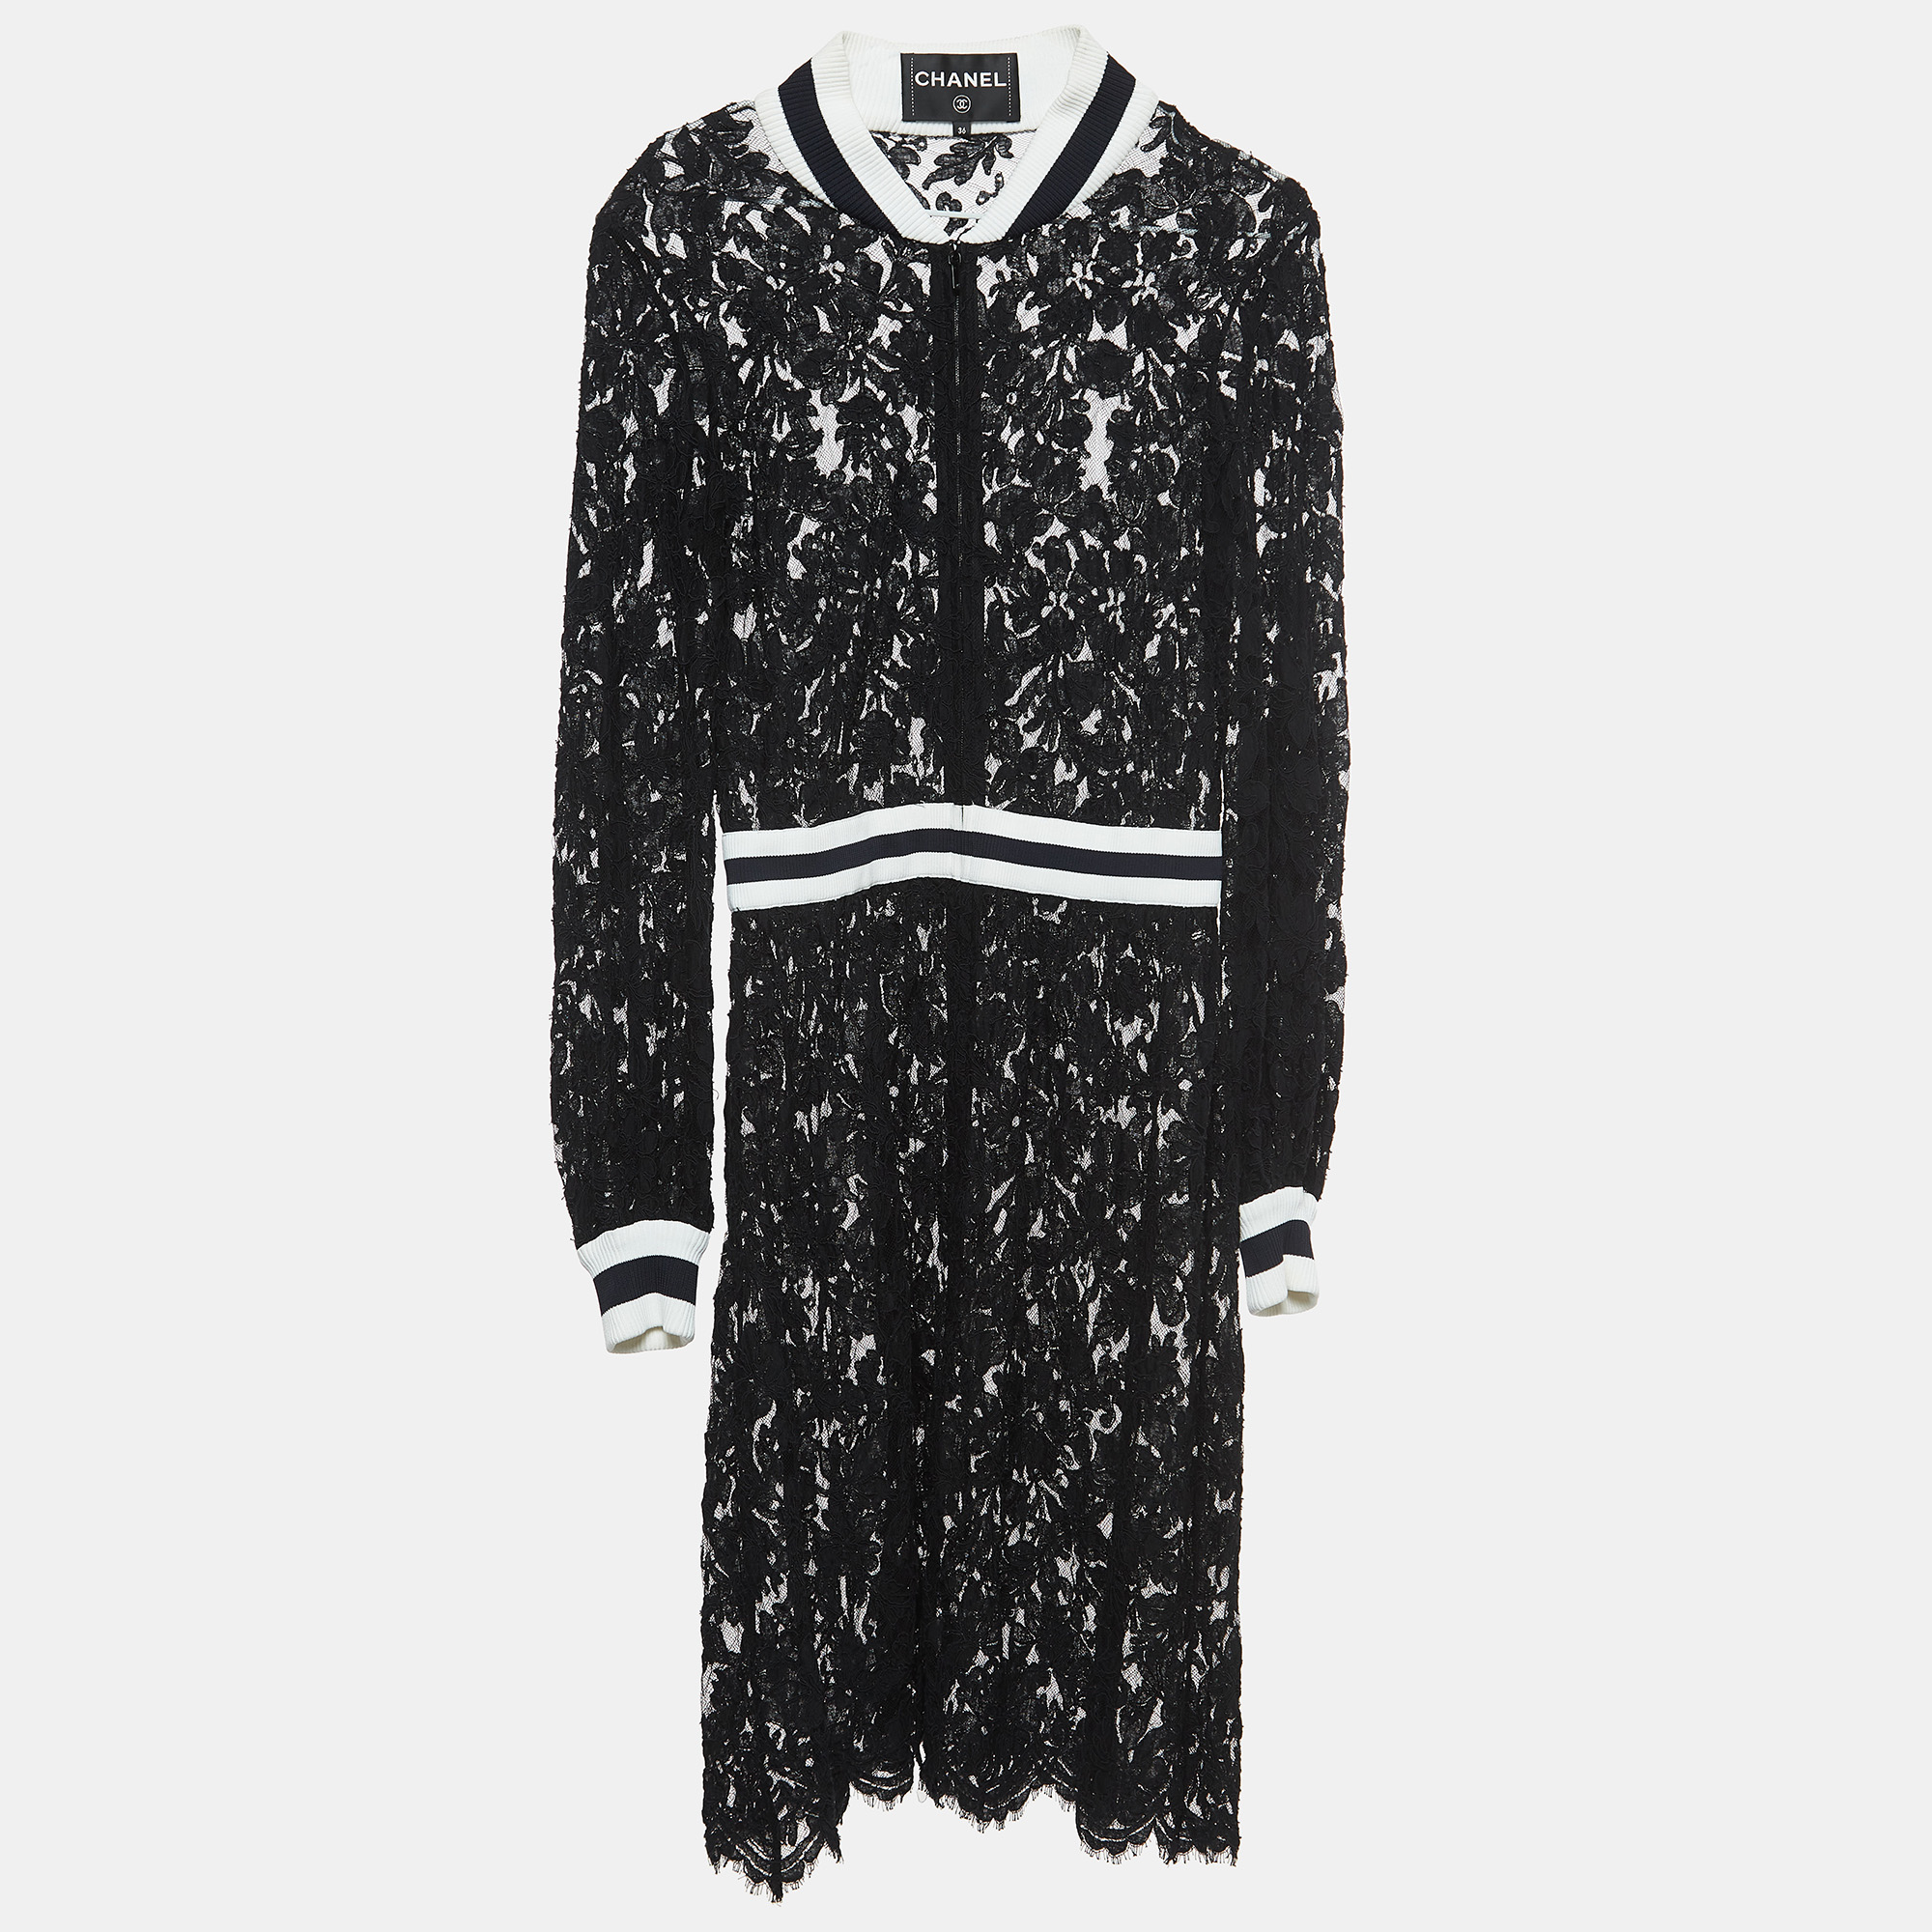 Pre-owned Chanel Black Floral Lace Zip-up Dress S